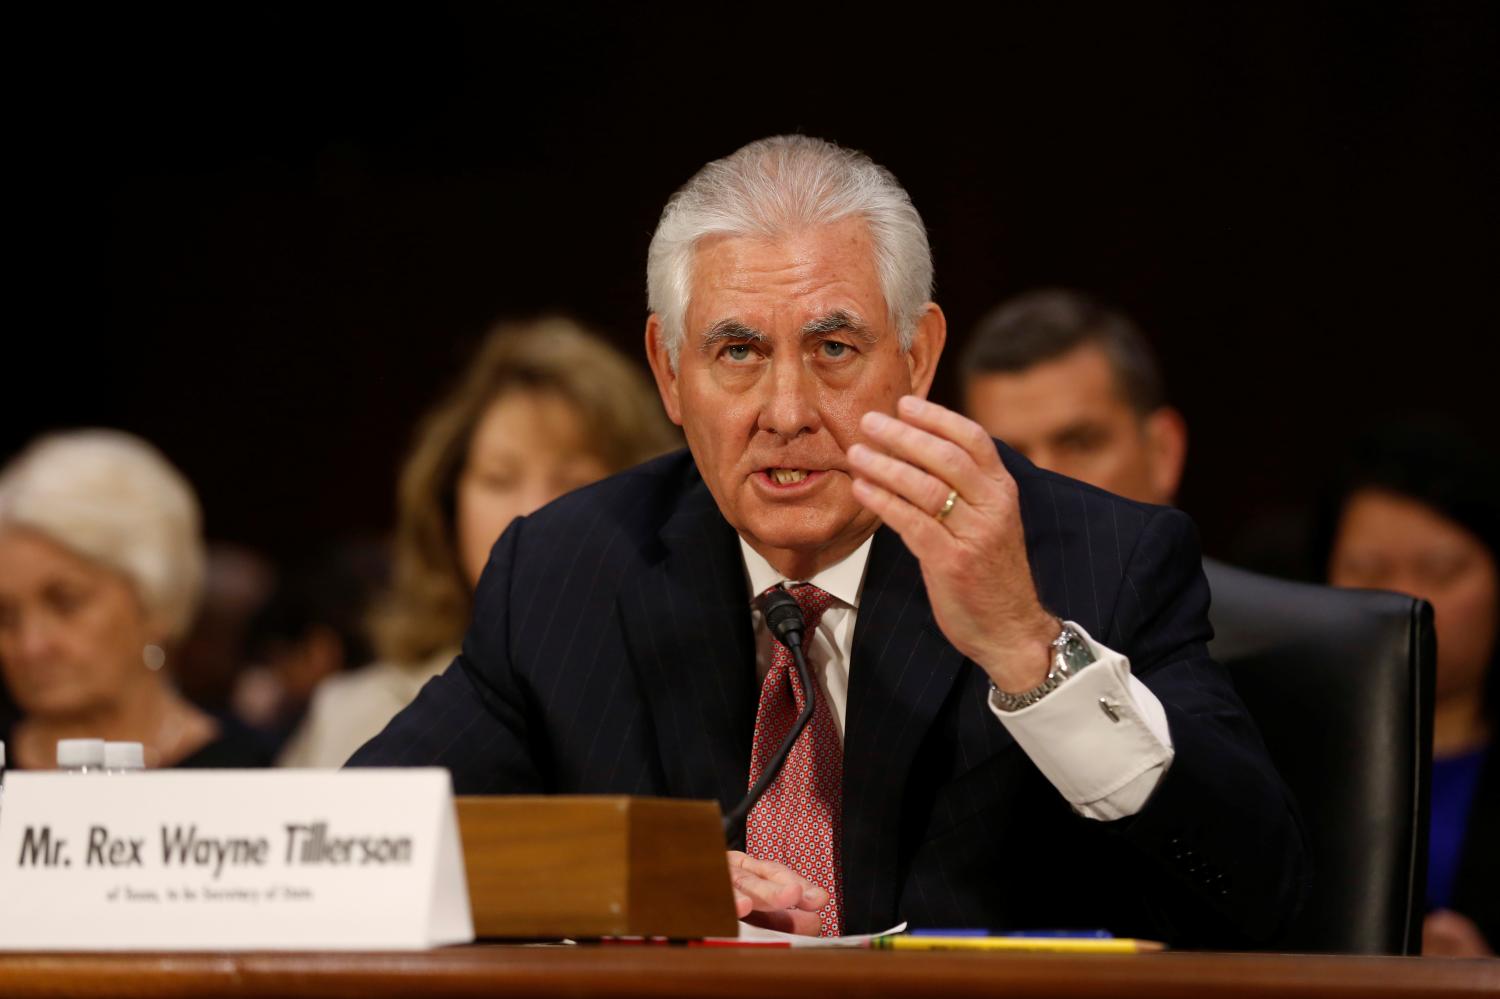 Rex Tillerson, the former chairman and chief executive officer of Exxon Mobil, testifies before a Senate Foreign Relations Committee confirmation hearing on his nomination to be U.S. secretary of state in Washington, U.S. January 11, 2017. REUTERS/Jonathan Ernst - RTX2YJ2R